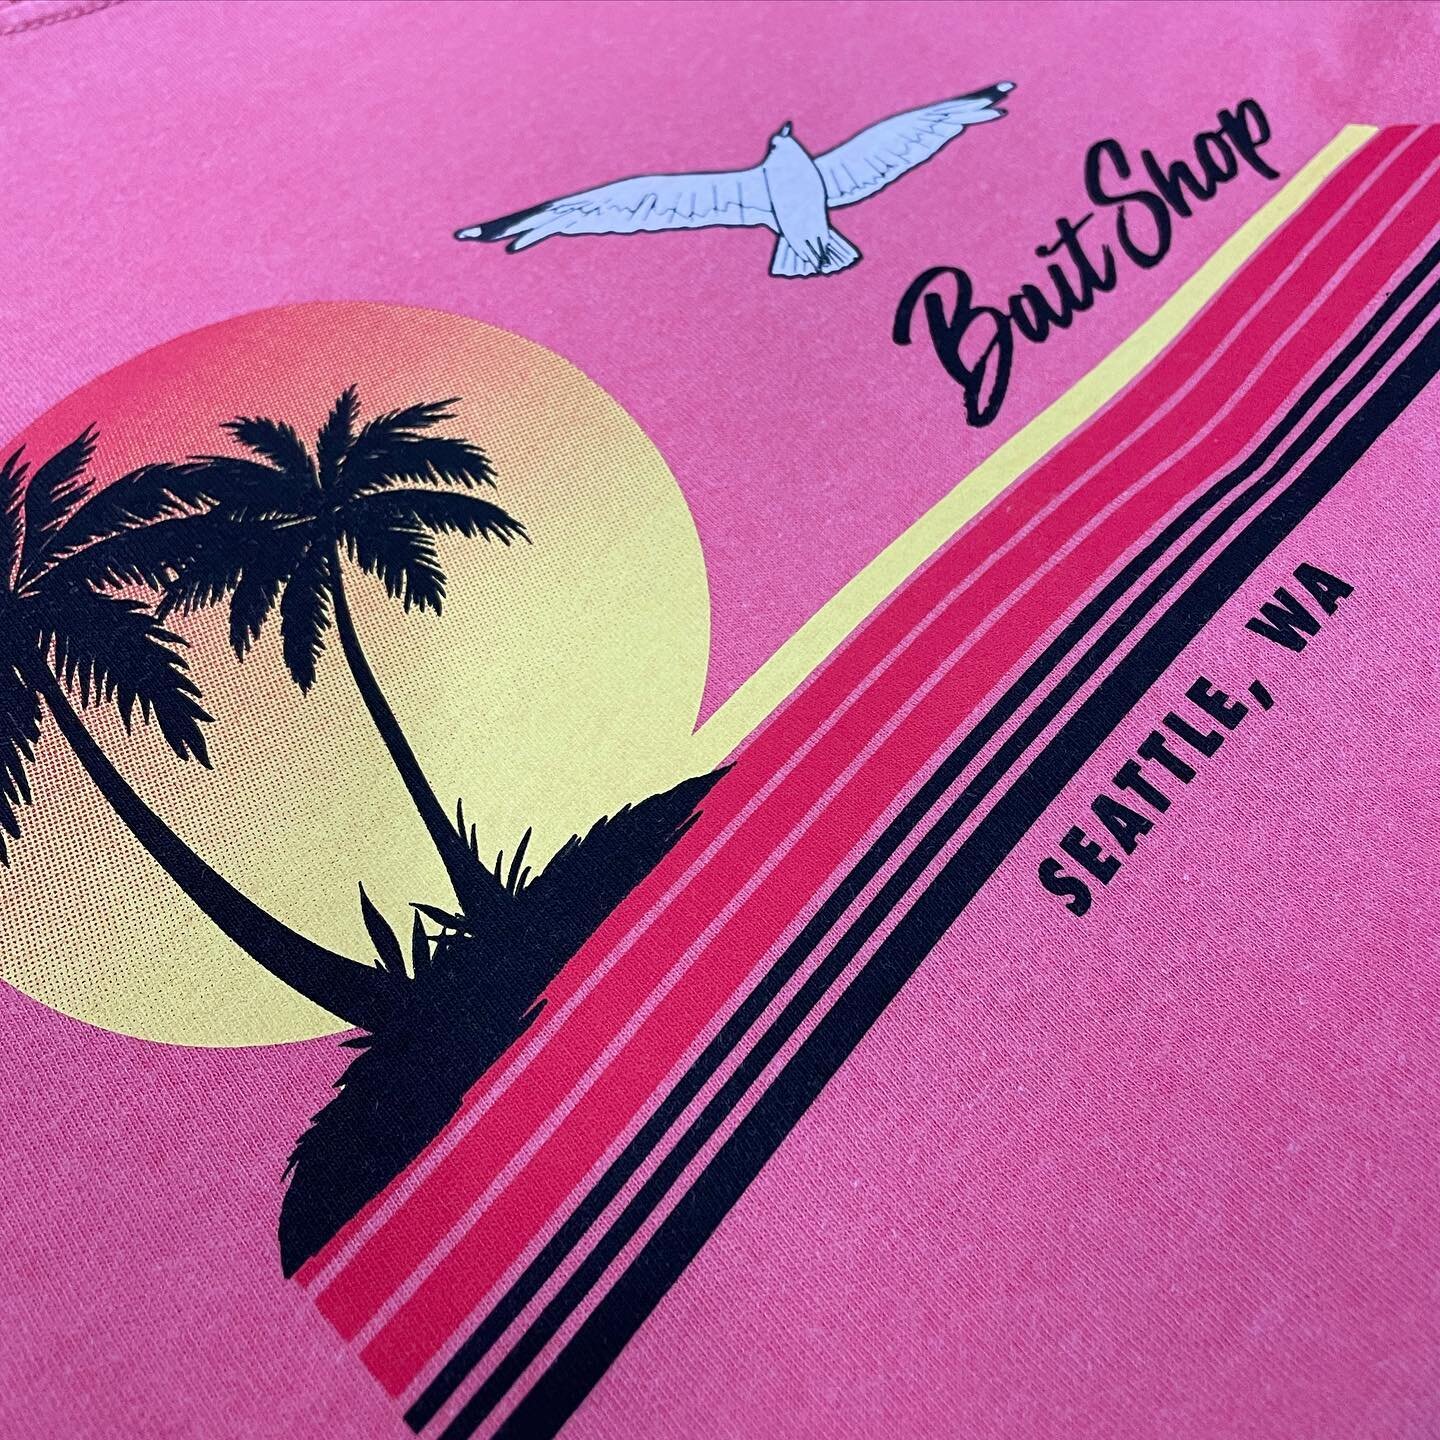 A @baitshopseattle classic returns, but even better! 4 colors on @comfort_colors watermelon tees 🍉
.
.
.
#waterbasedink #waterbasedprinting #seattle #seattlescreenprinting  #womeninprint #womeninprintmaking #womenwhoprint #roq #smallbusiness #seattl